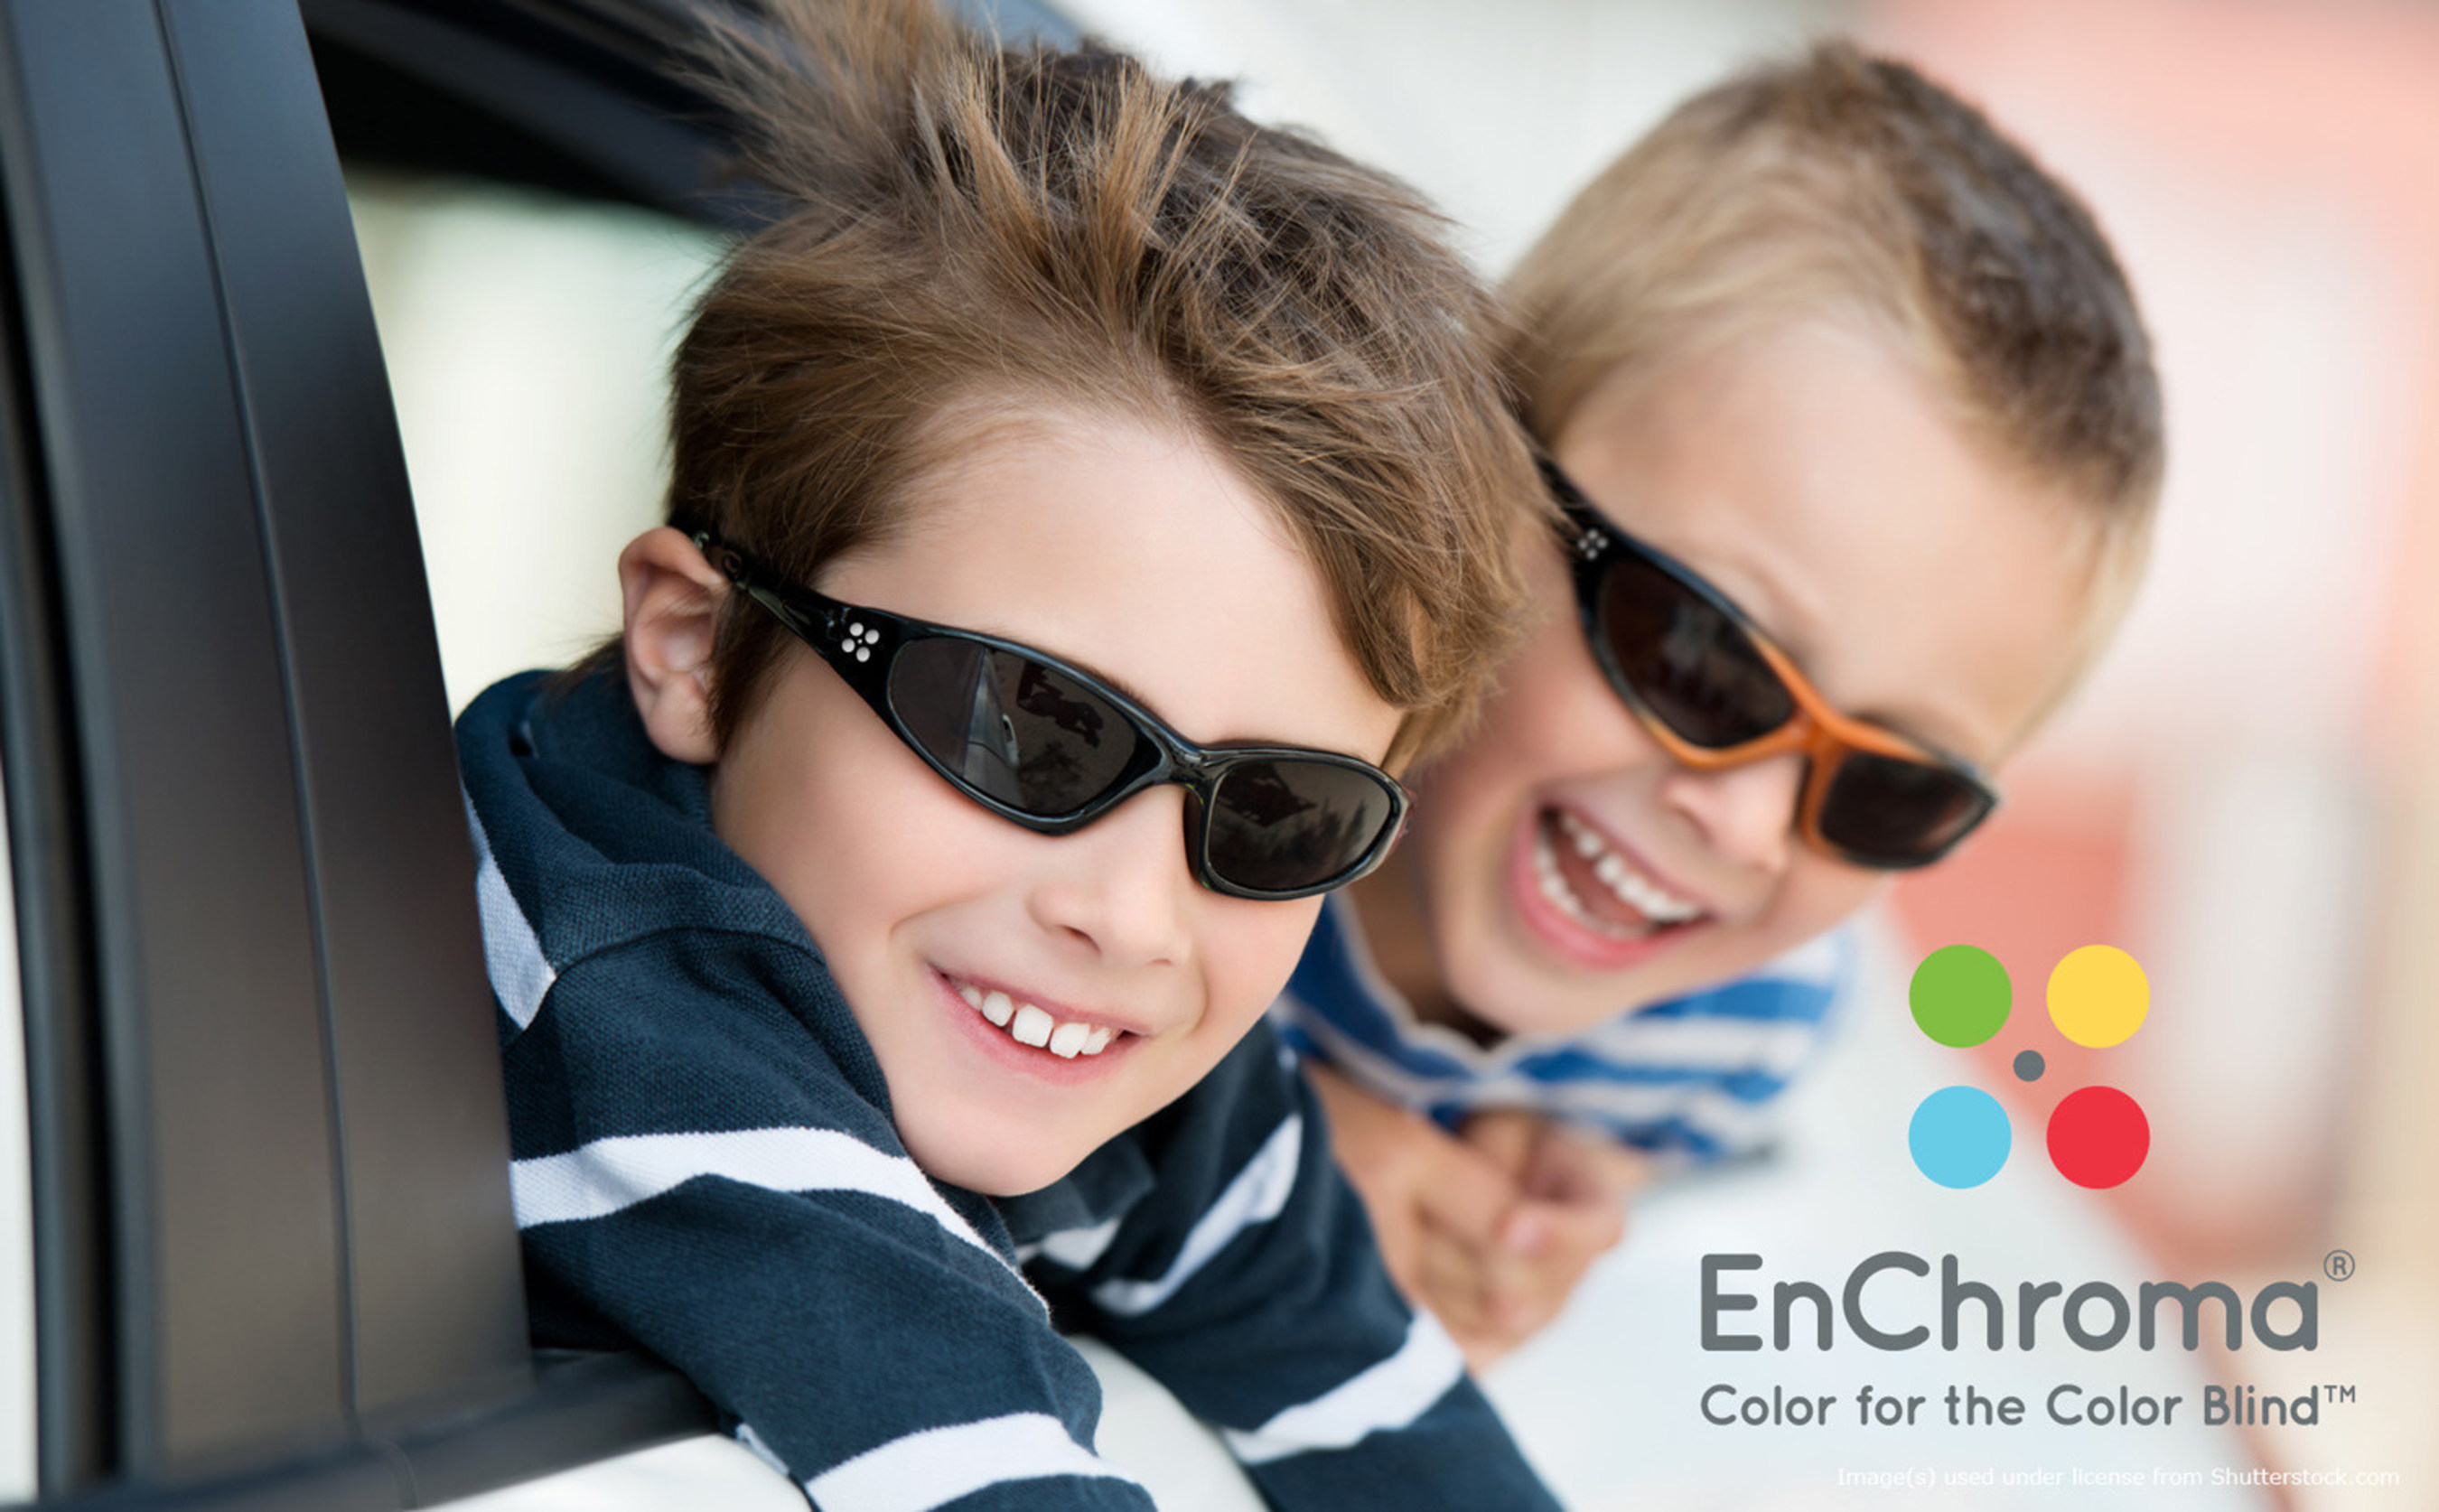 With a worldwide prevalence of up to 8% in males, many young boys are first diagnosed as color blind in school-mandated vision testing. EnChroma's new polycarbonate Cx lens and pediatric frame selections bring an important new technology to parents and educators concerned about the connection between academic performance and color vision deficiencies.